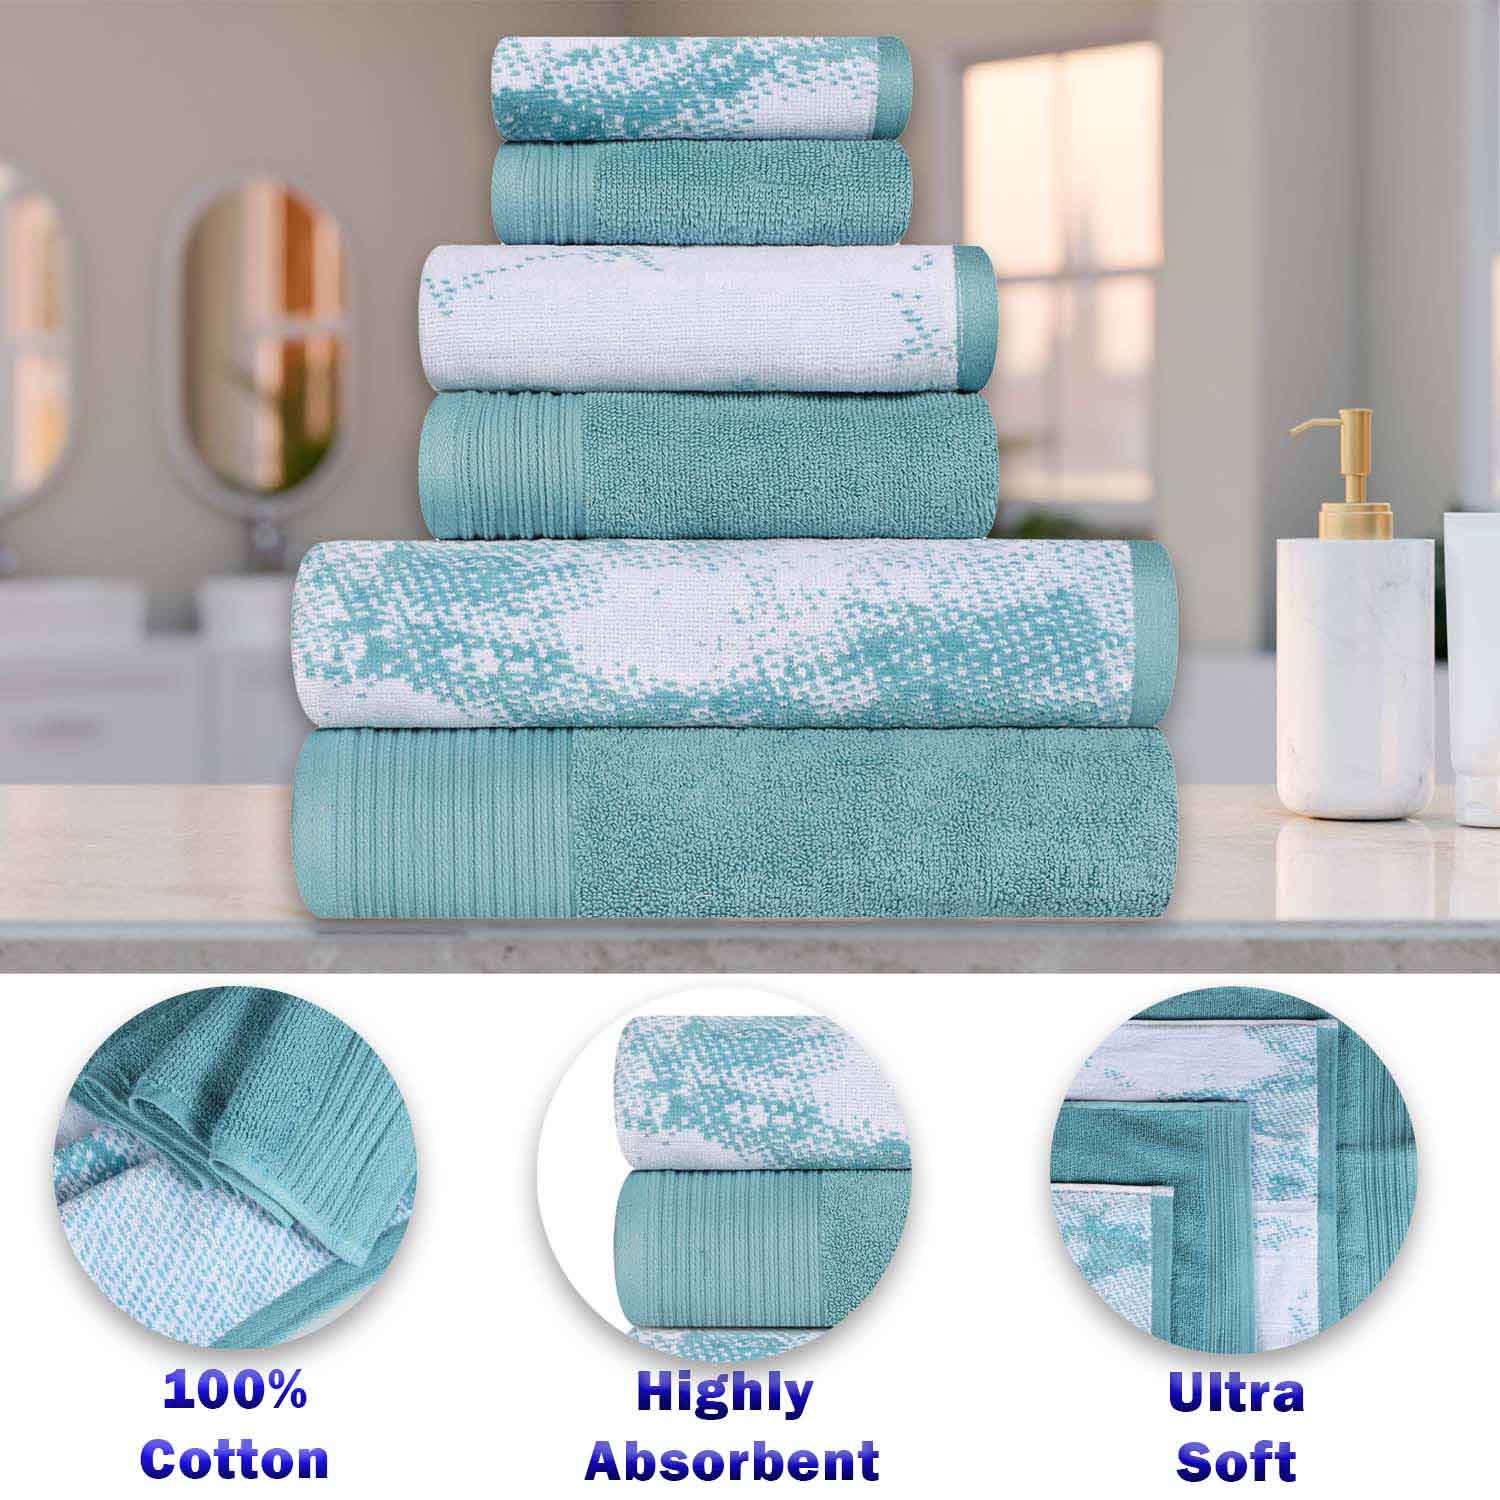 Cotton Marble and Solid Quick Dry 10 Piece Assorted Bathroom Towel Set - Cyan